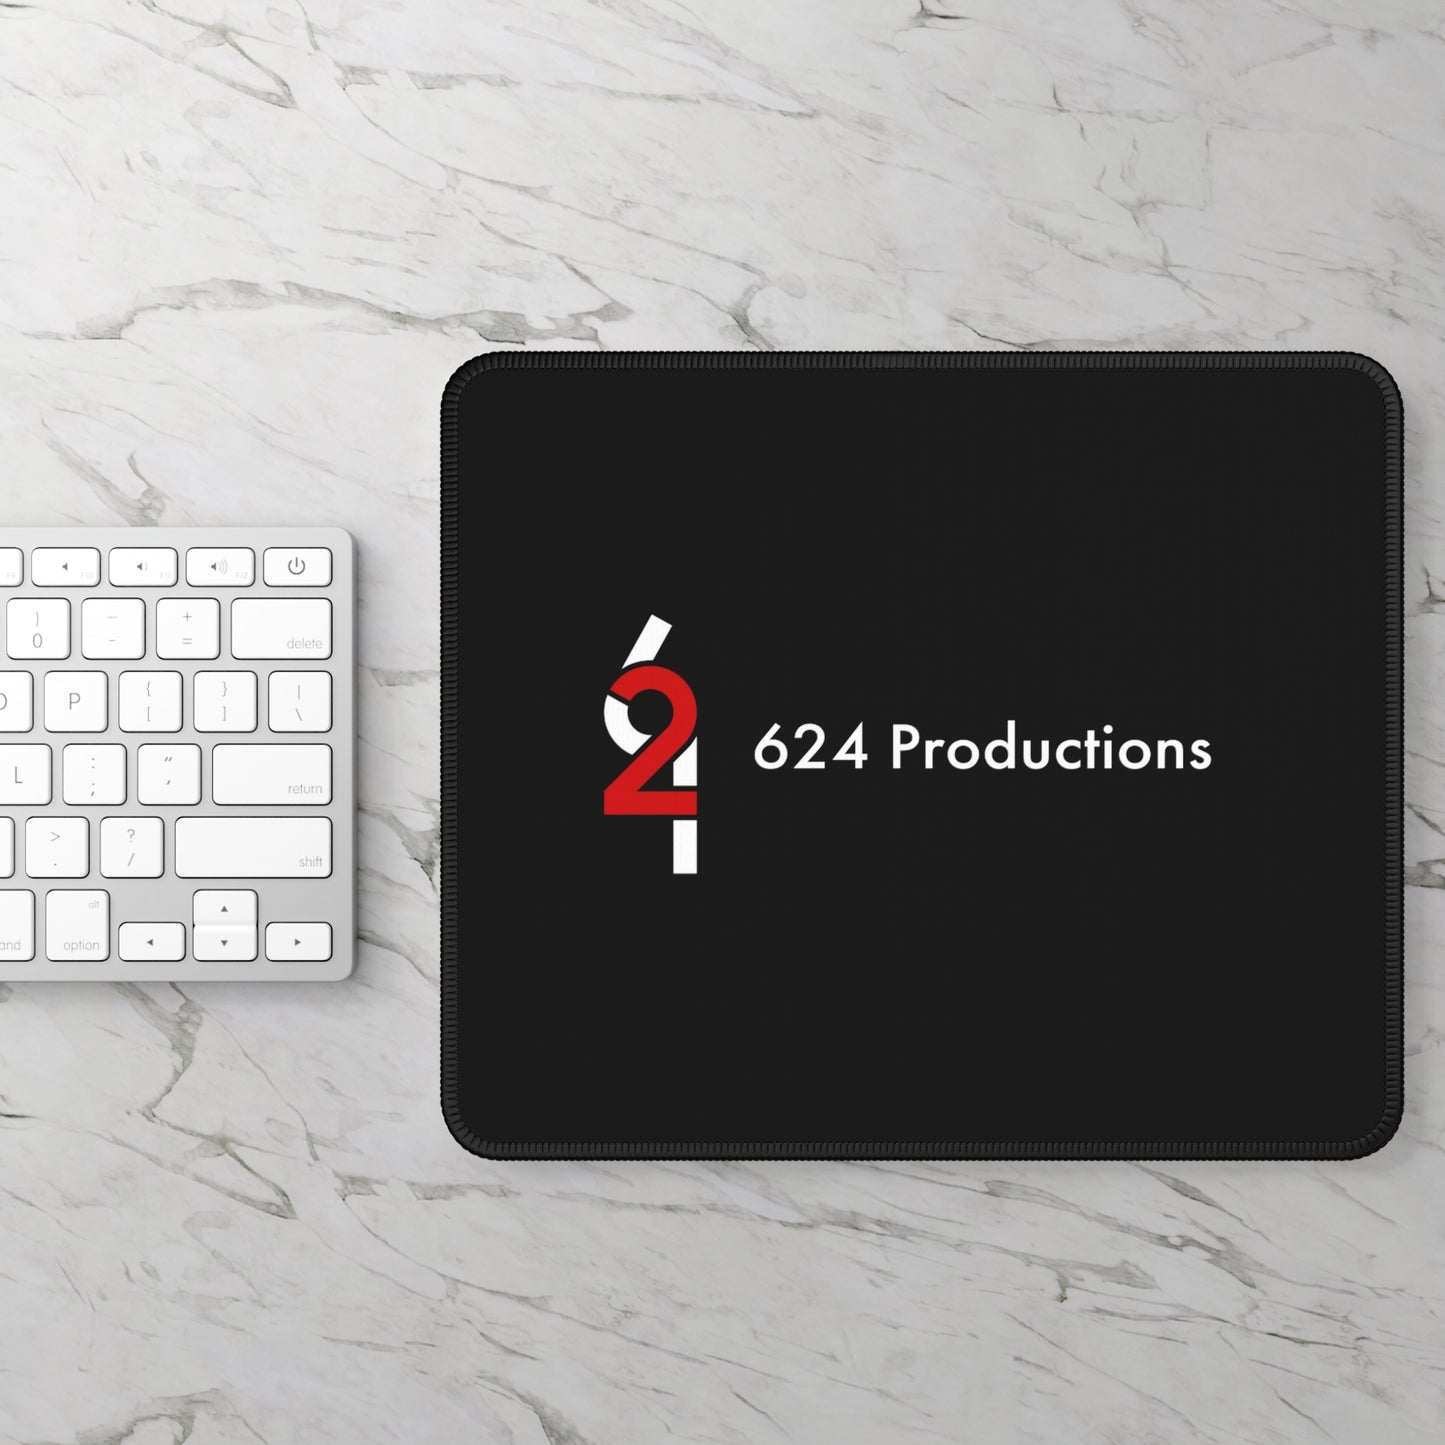 624 Productions Mouse Pad